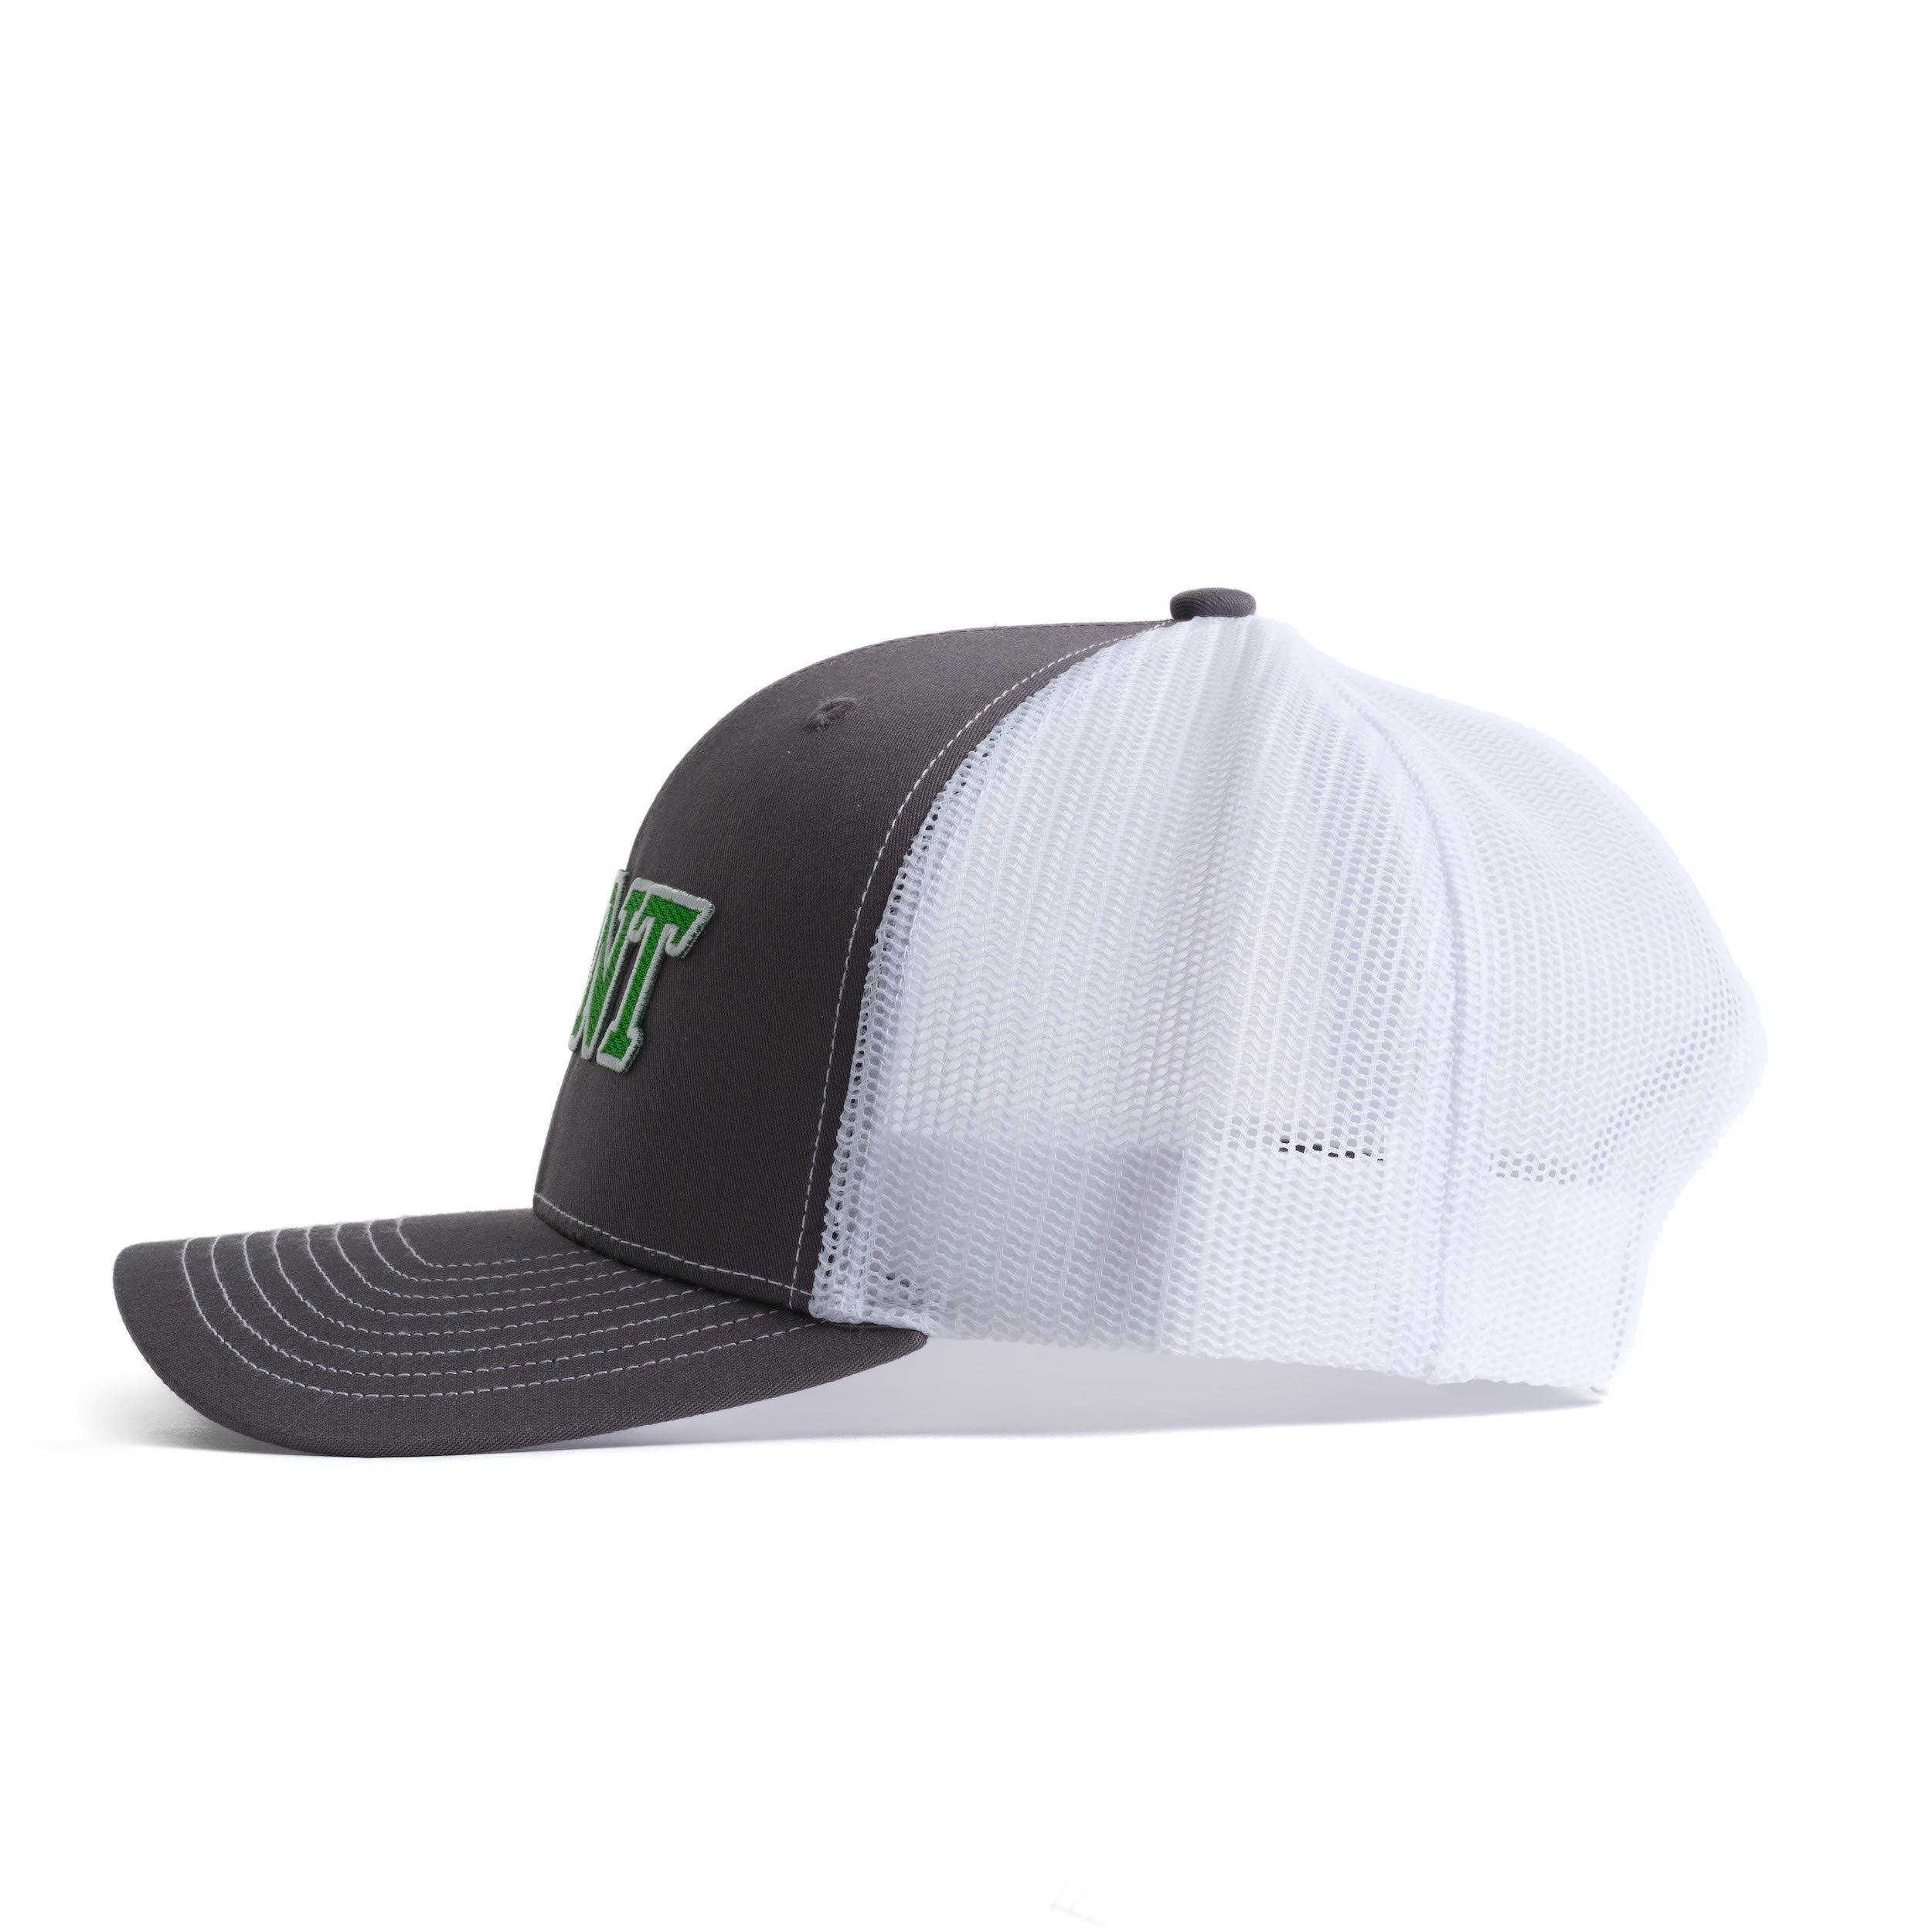 Mean Green track and field cap